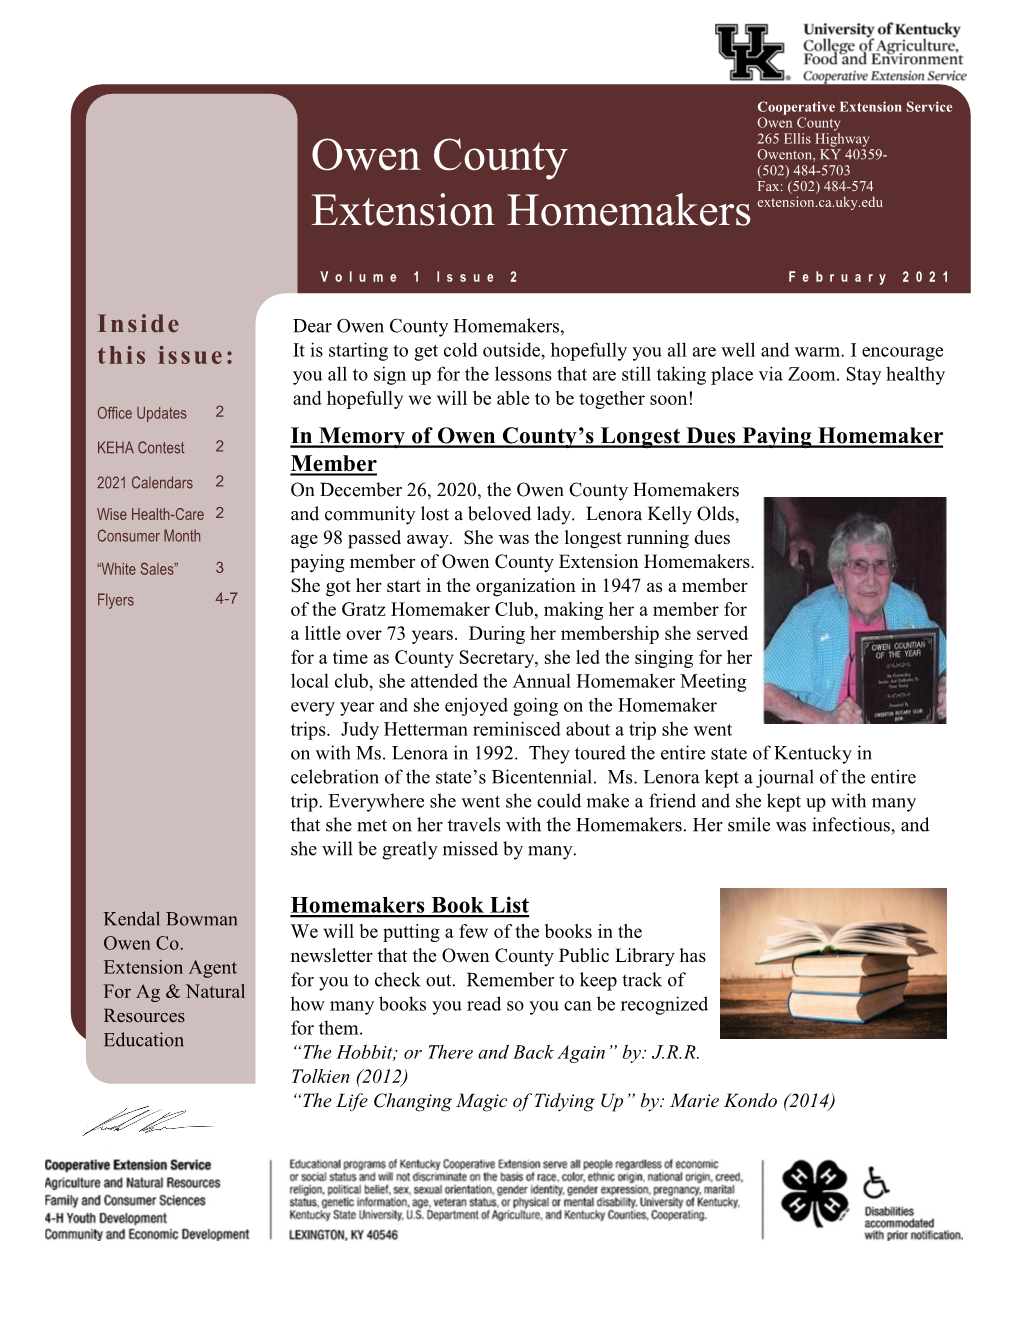 Owen County Extension Homemakers